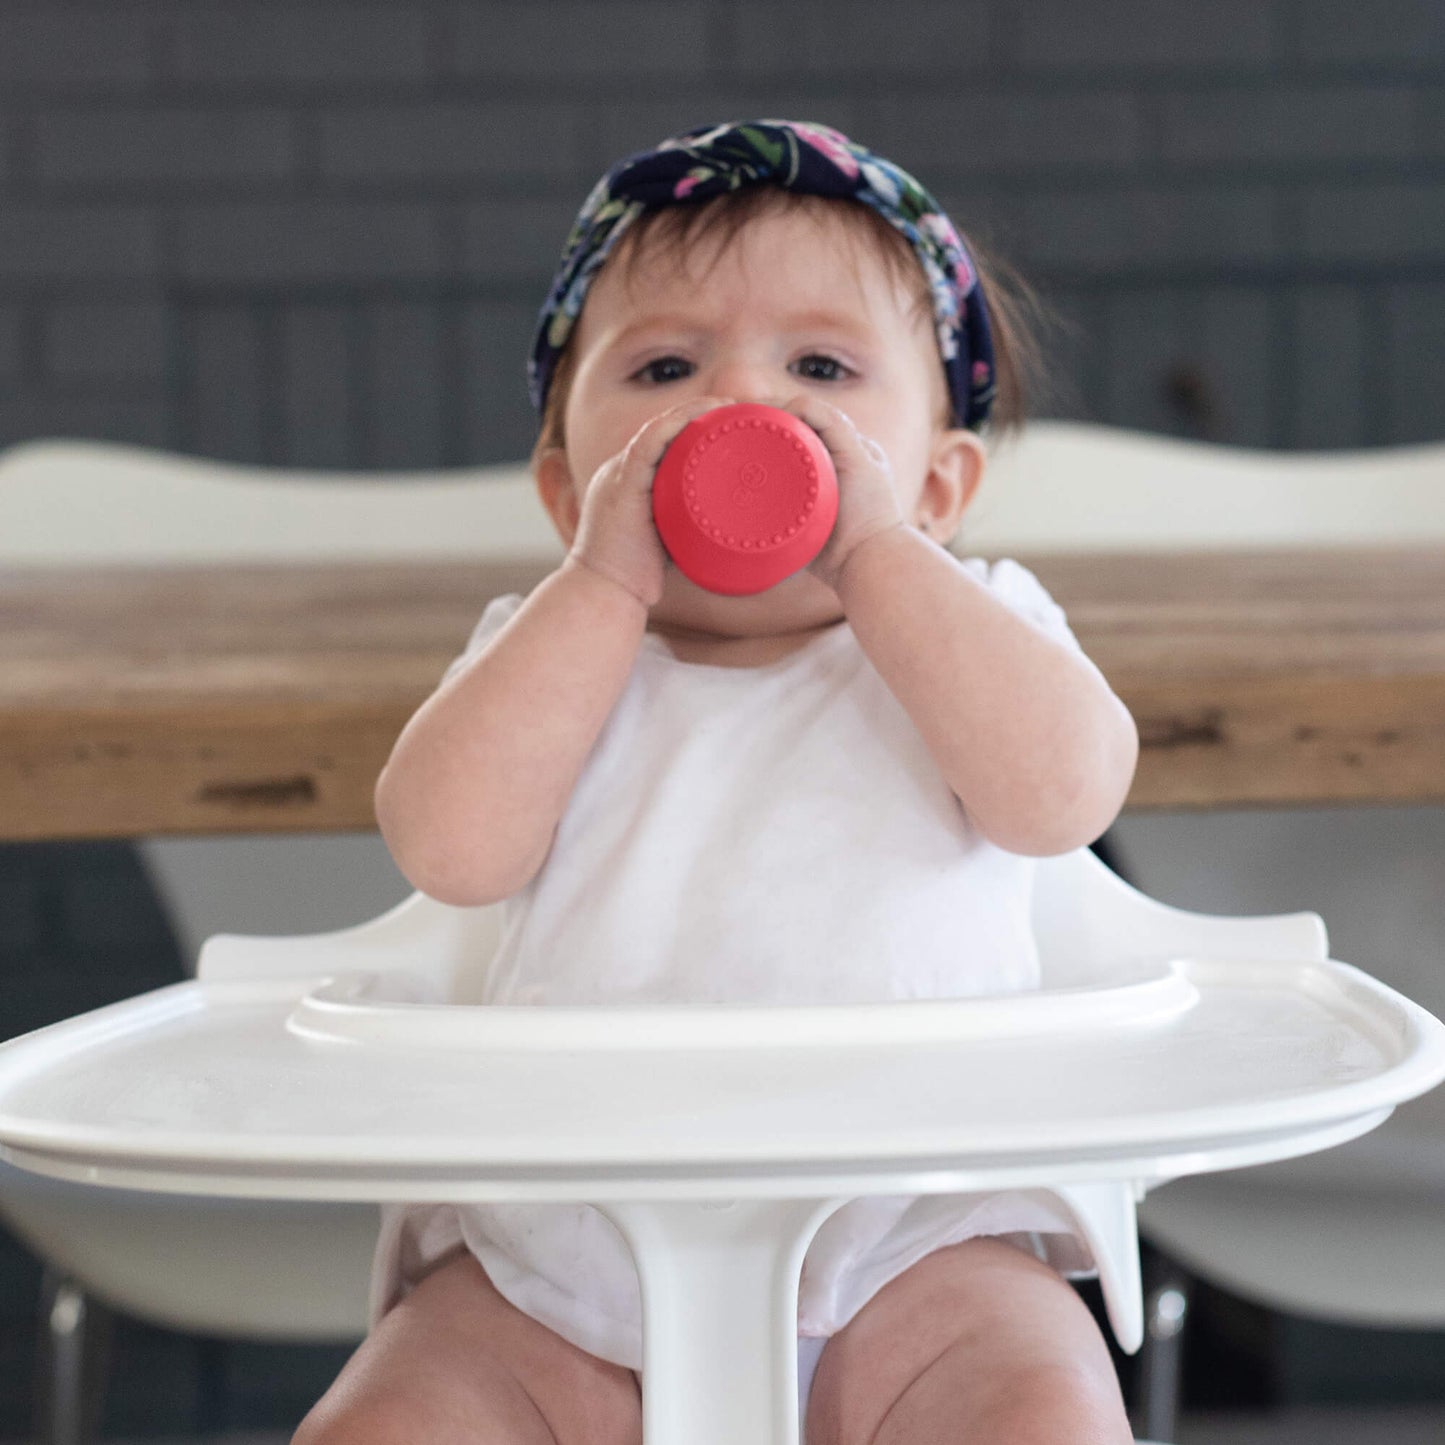 ezpz Tiny Cup (Blush) - 100% Silicone Training Cup for Infants - Designed  by a Pediatric Feeding Specialist - 4 Months+